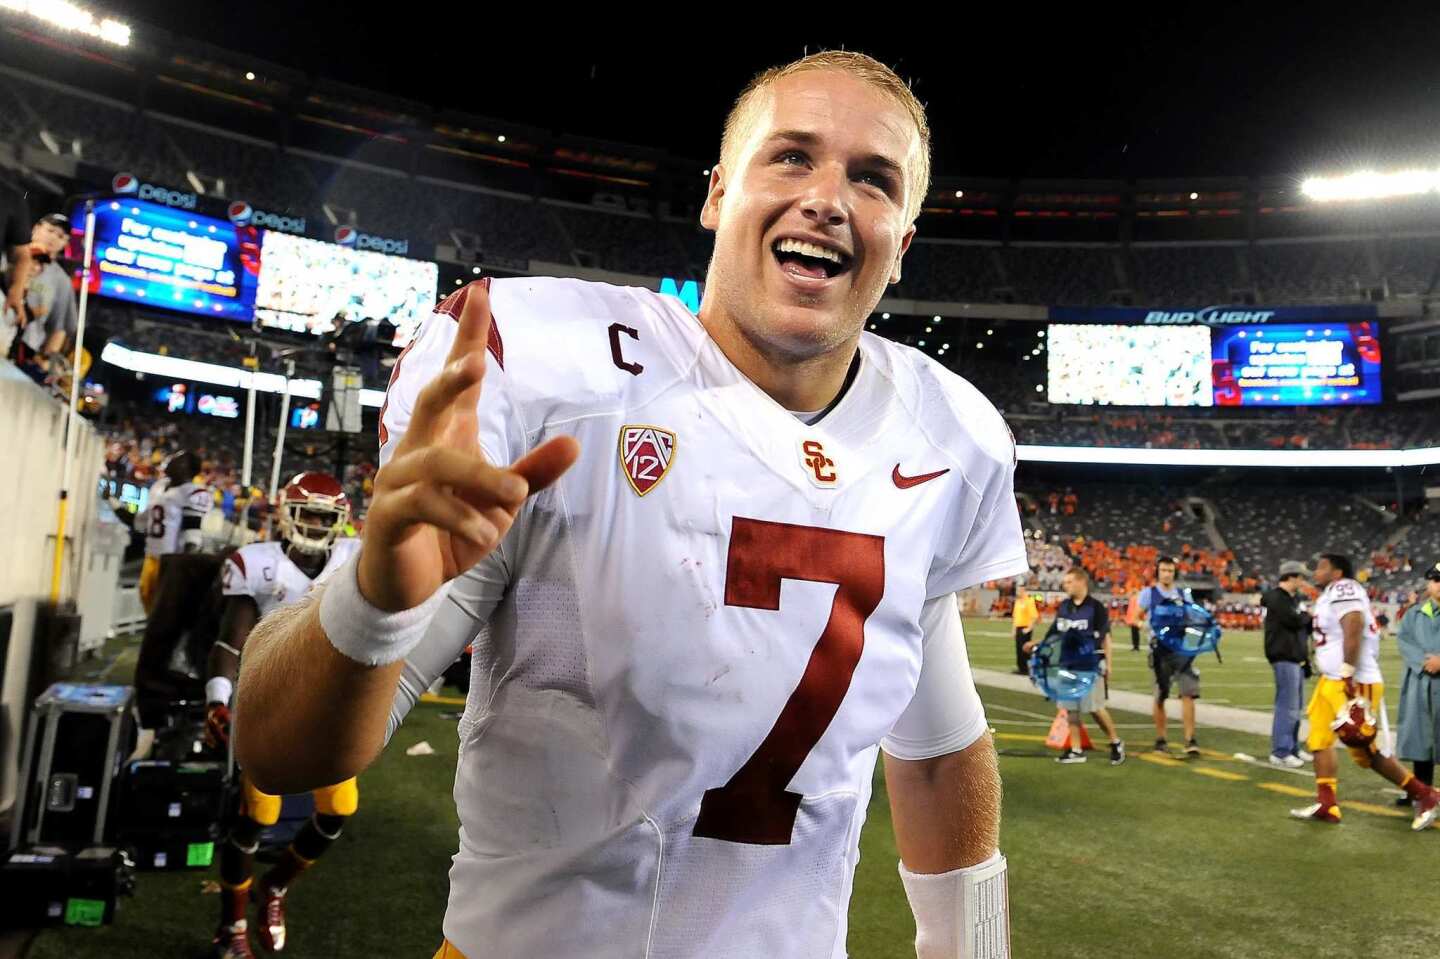 USC quarterback Matt Barkley celebrates with fans after the 42-29 victory over Syracuse on Saturday.